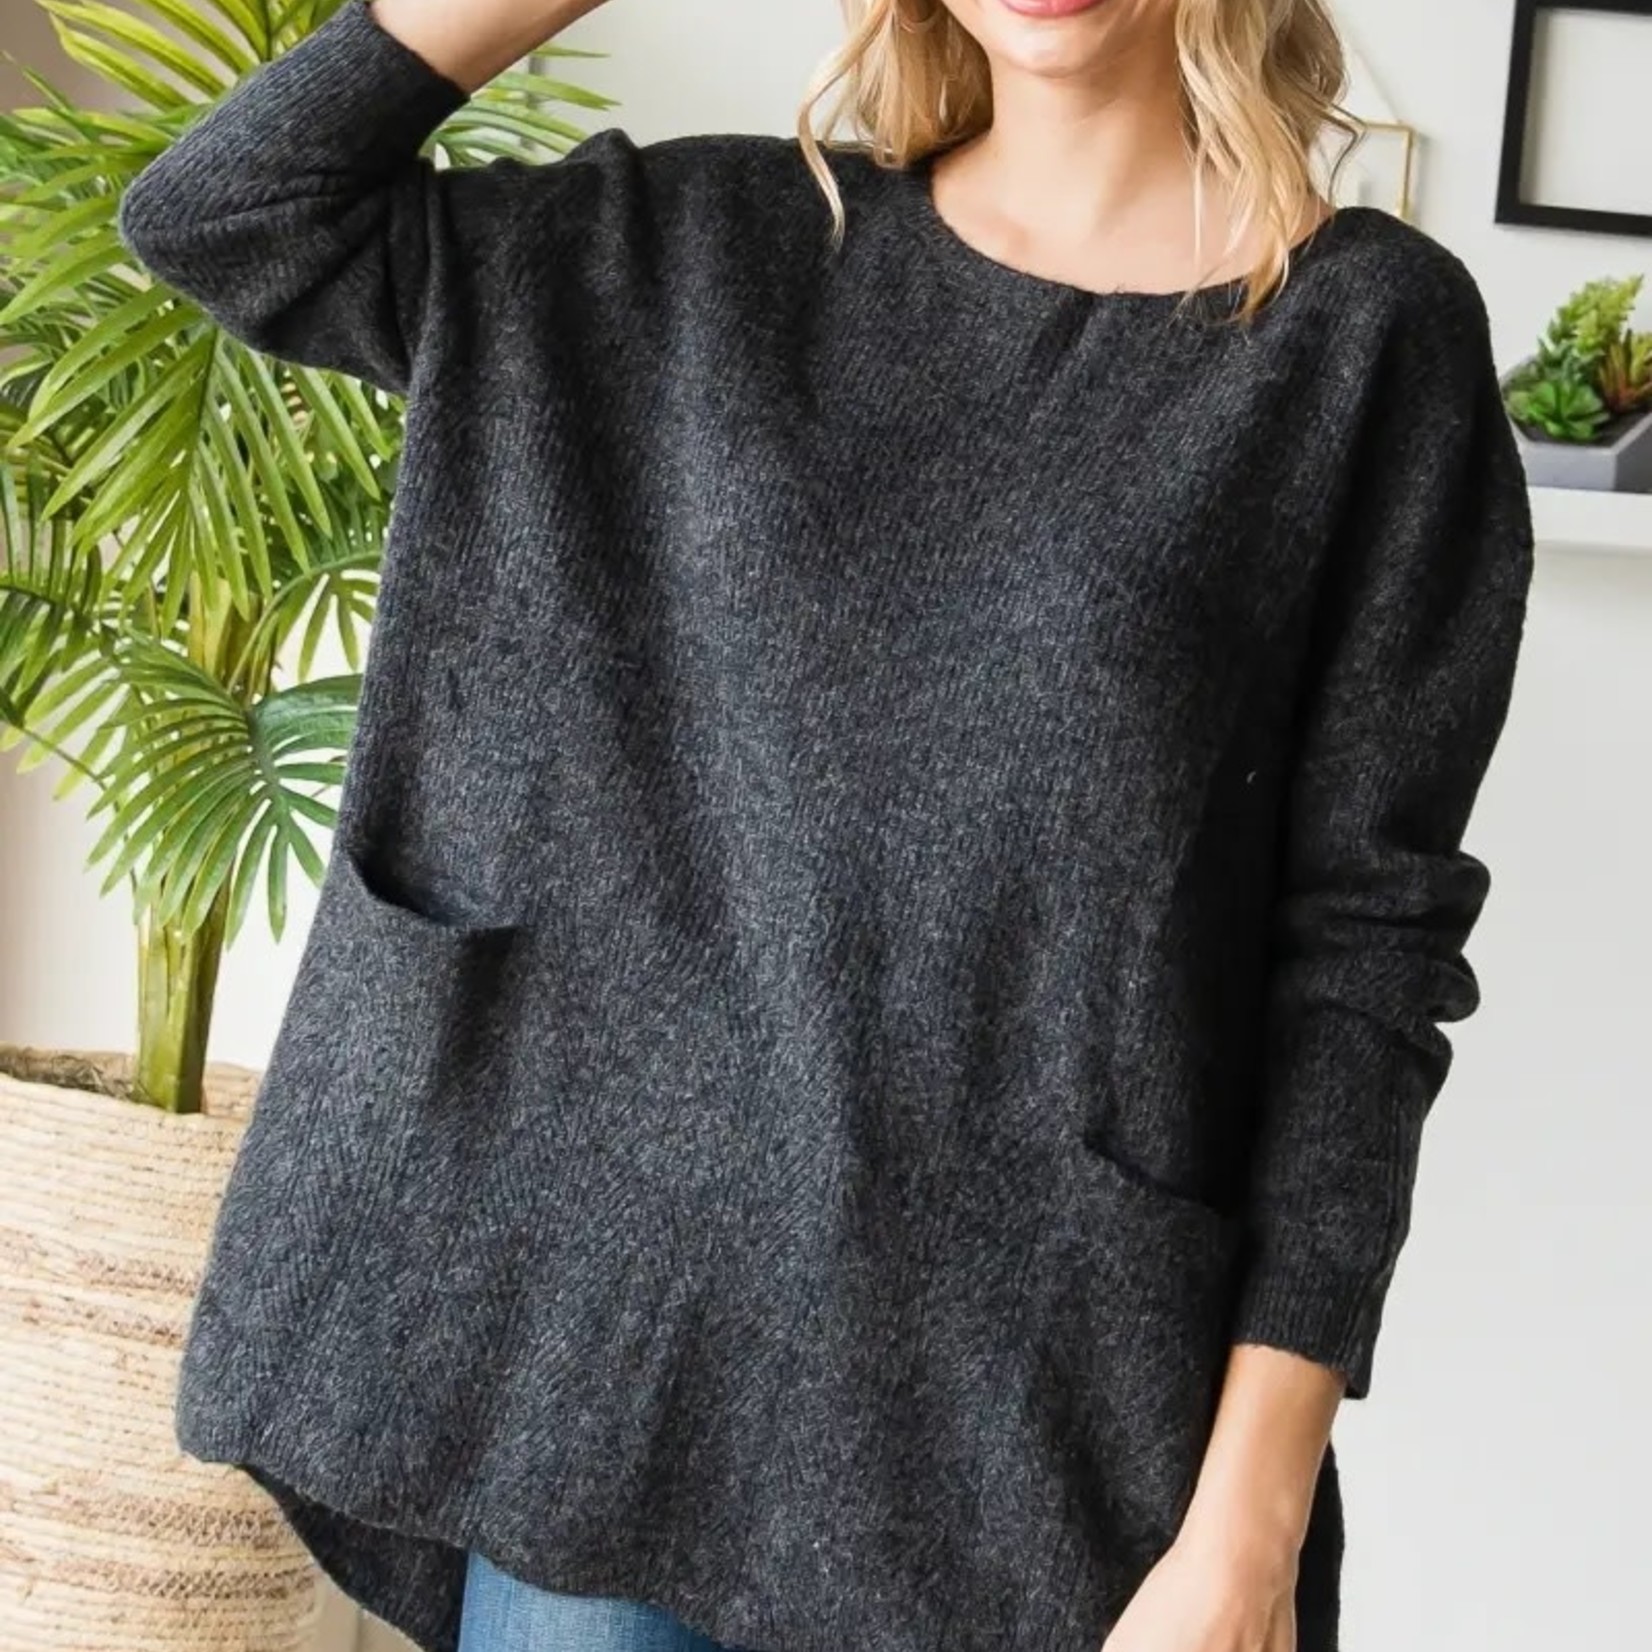 Veveret Dolly Two Pocket Sweater